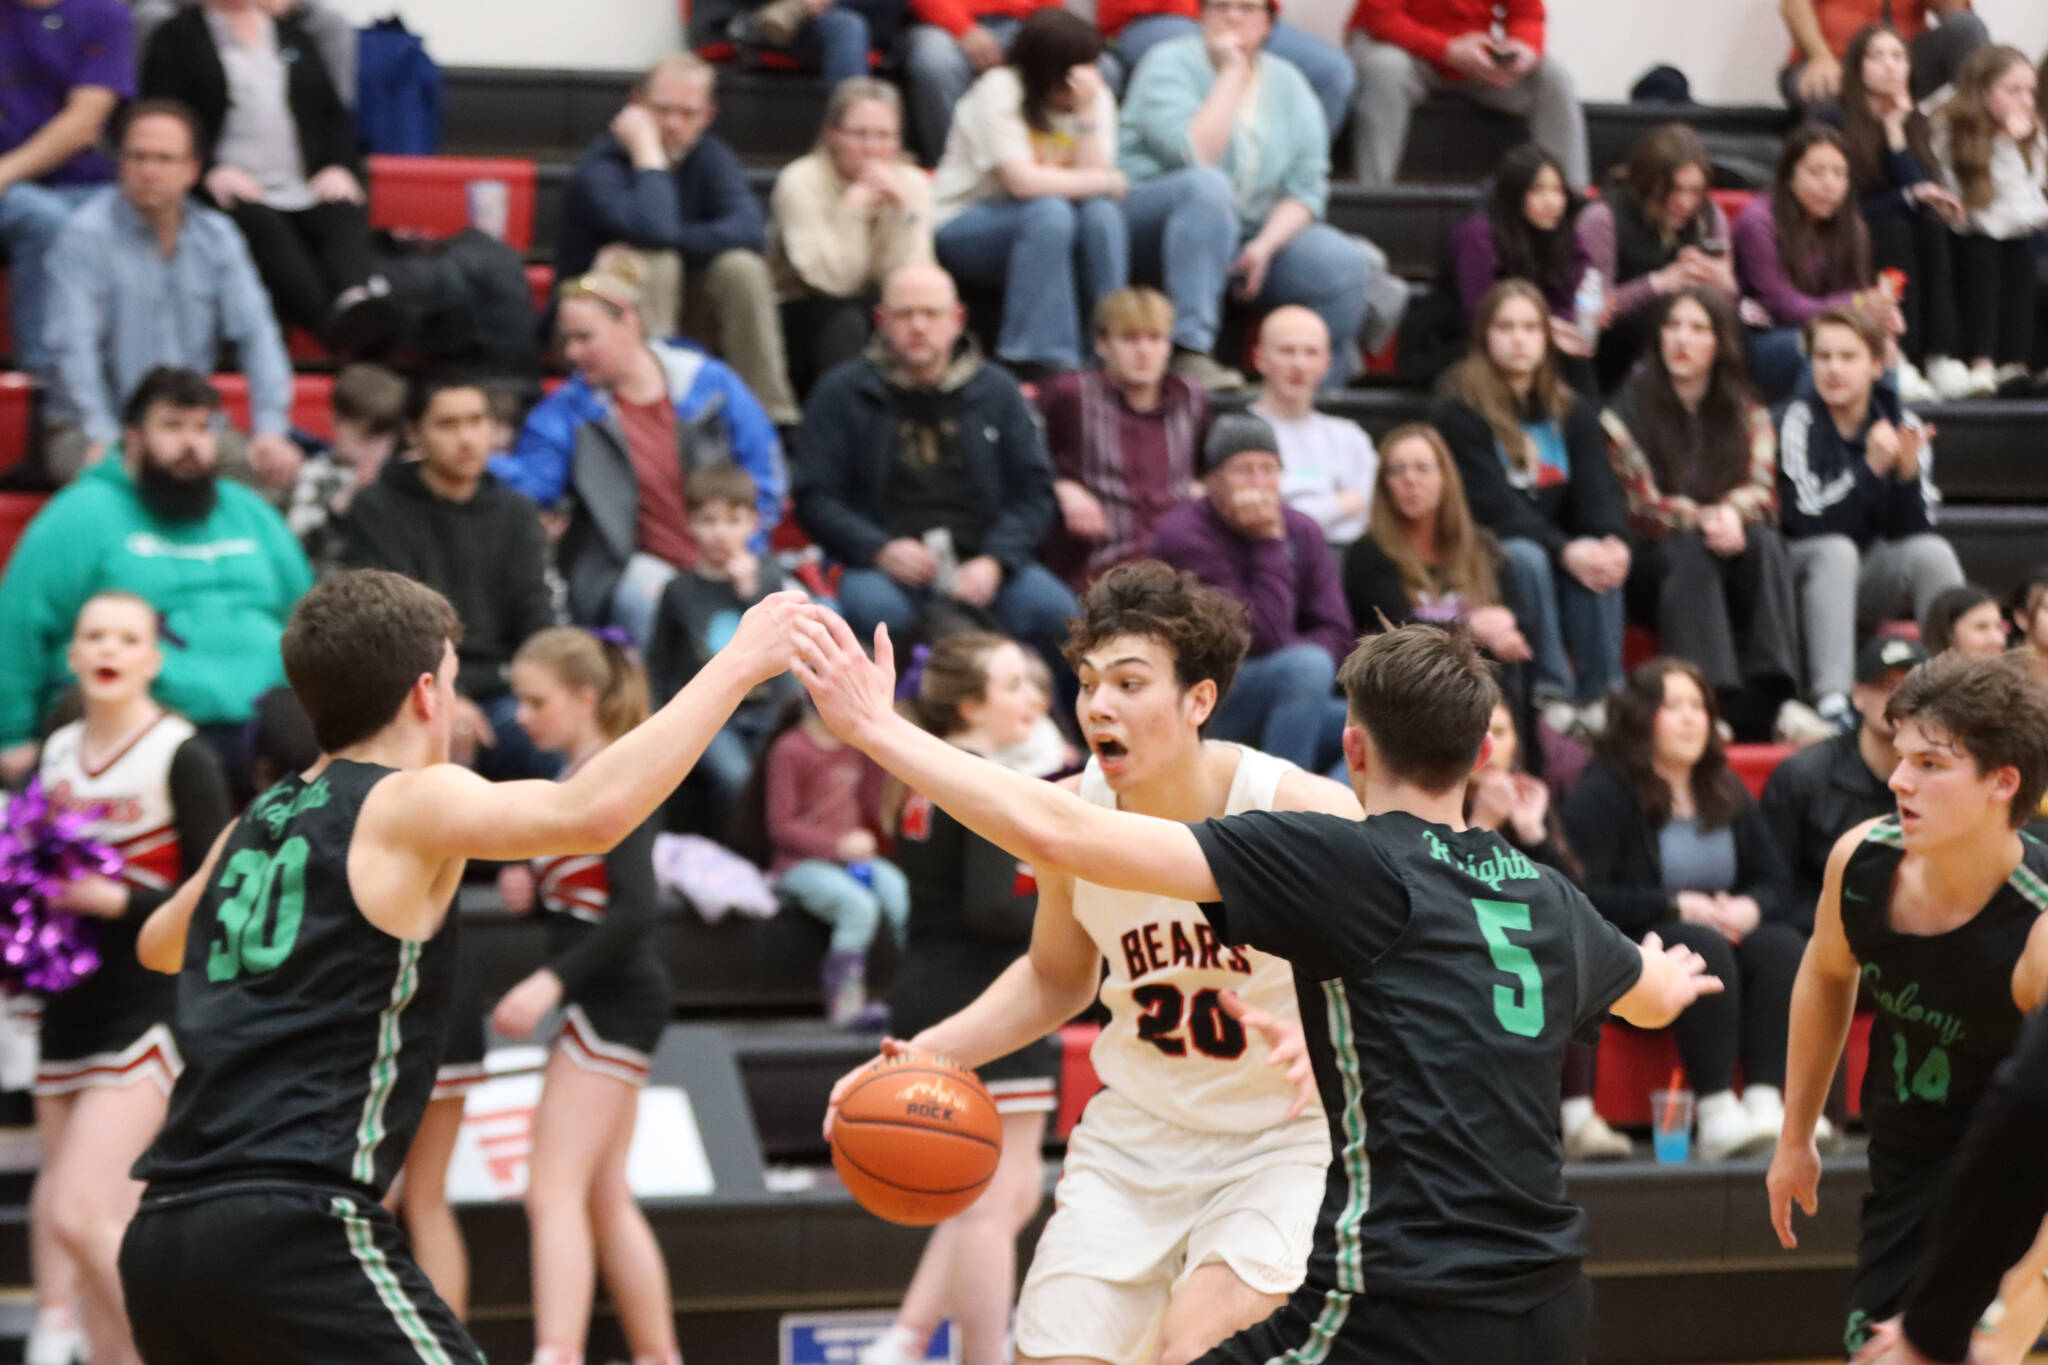 JDHS senior Orion Dybdahl takes the ball down court while being closely guarded by two defenders on Wednesday night’s game. Dybdahl led the Crimson Bears in scoring with 19 points. (Jonson Kuhn / Juneau Empire)